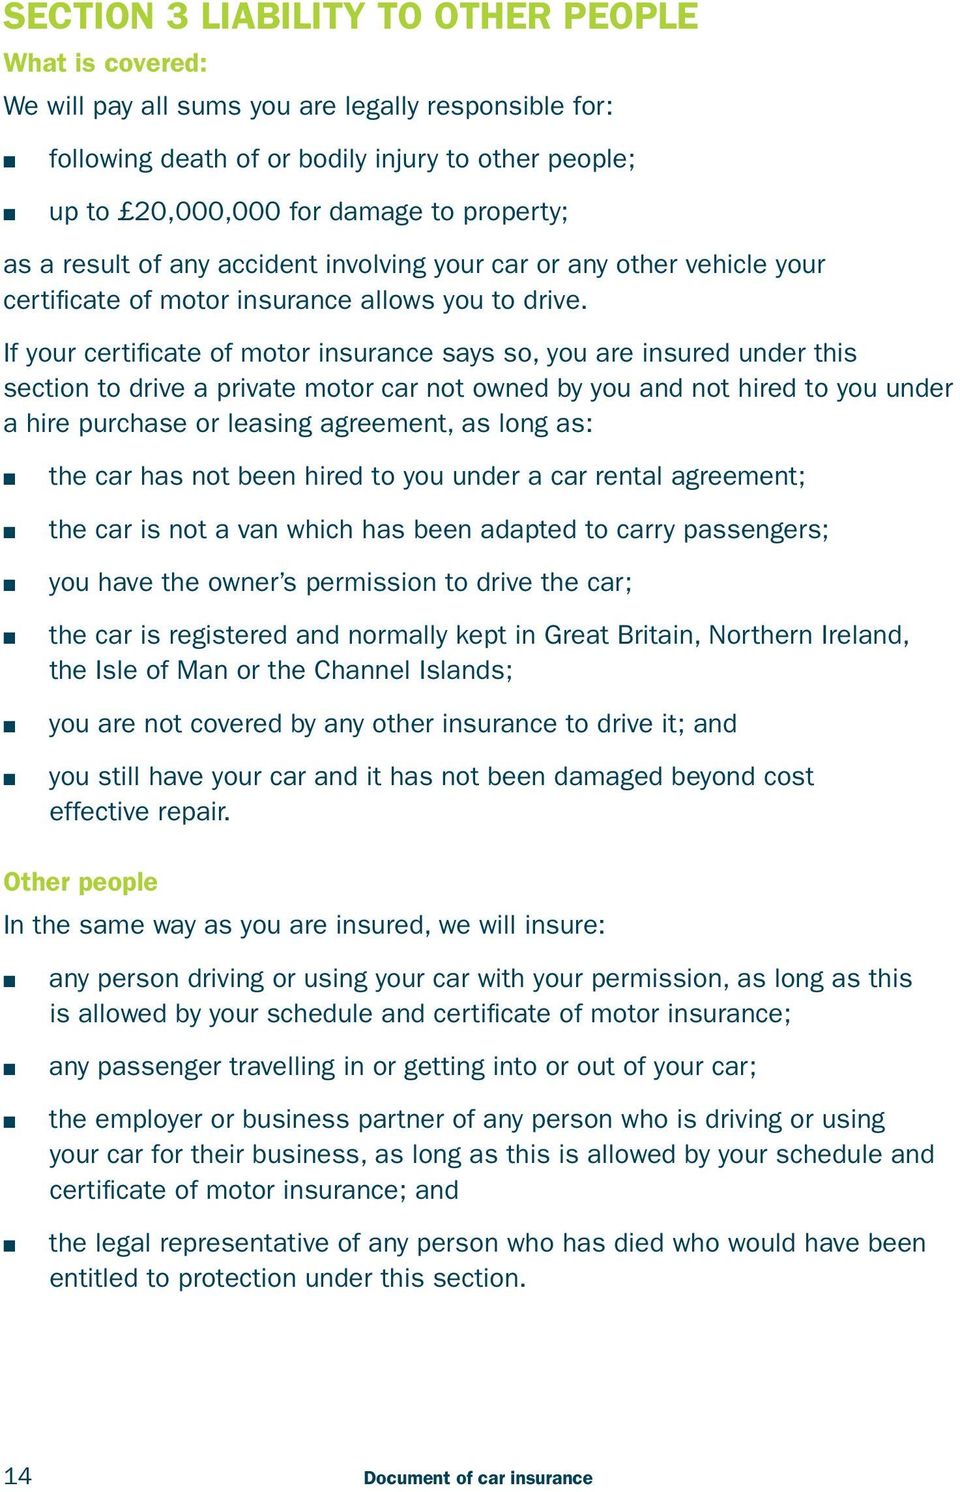 If your certificate of motor insurance says so, you are insured under this section to drive a private motor car not owned by you and not hired to you under a hire purchase or leasing agreement, as